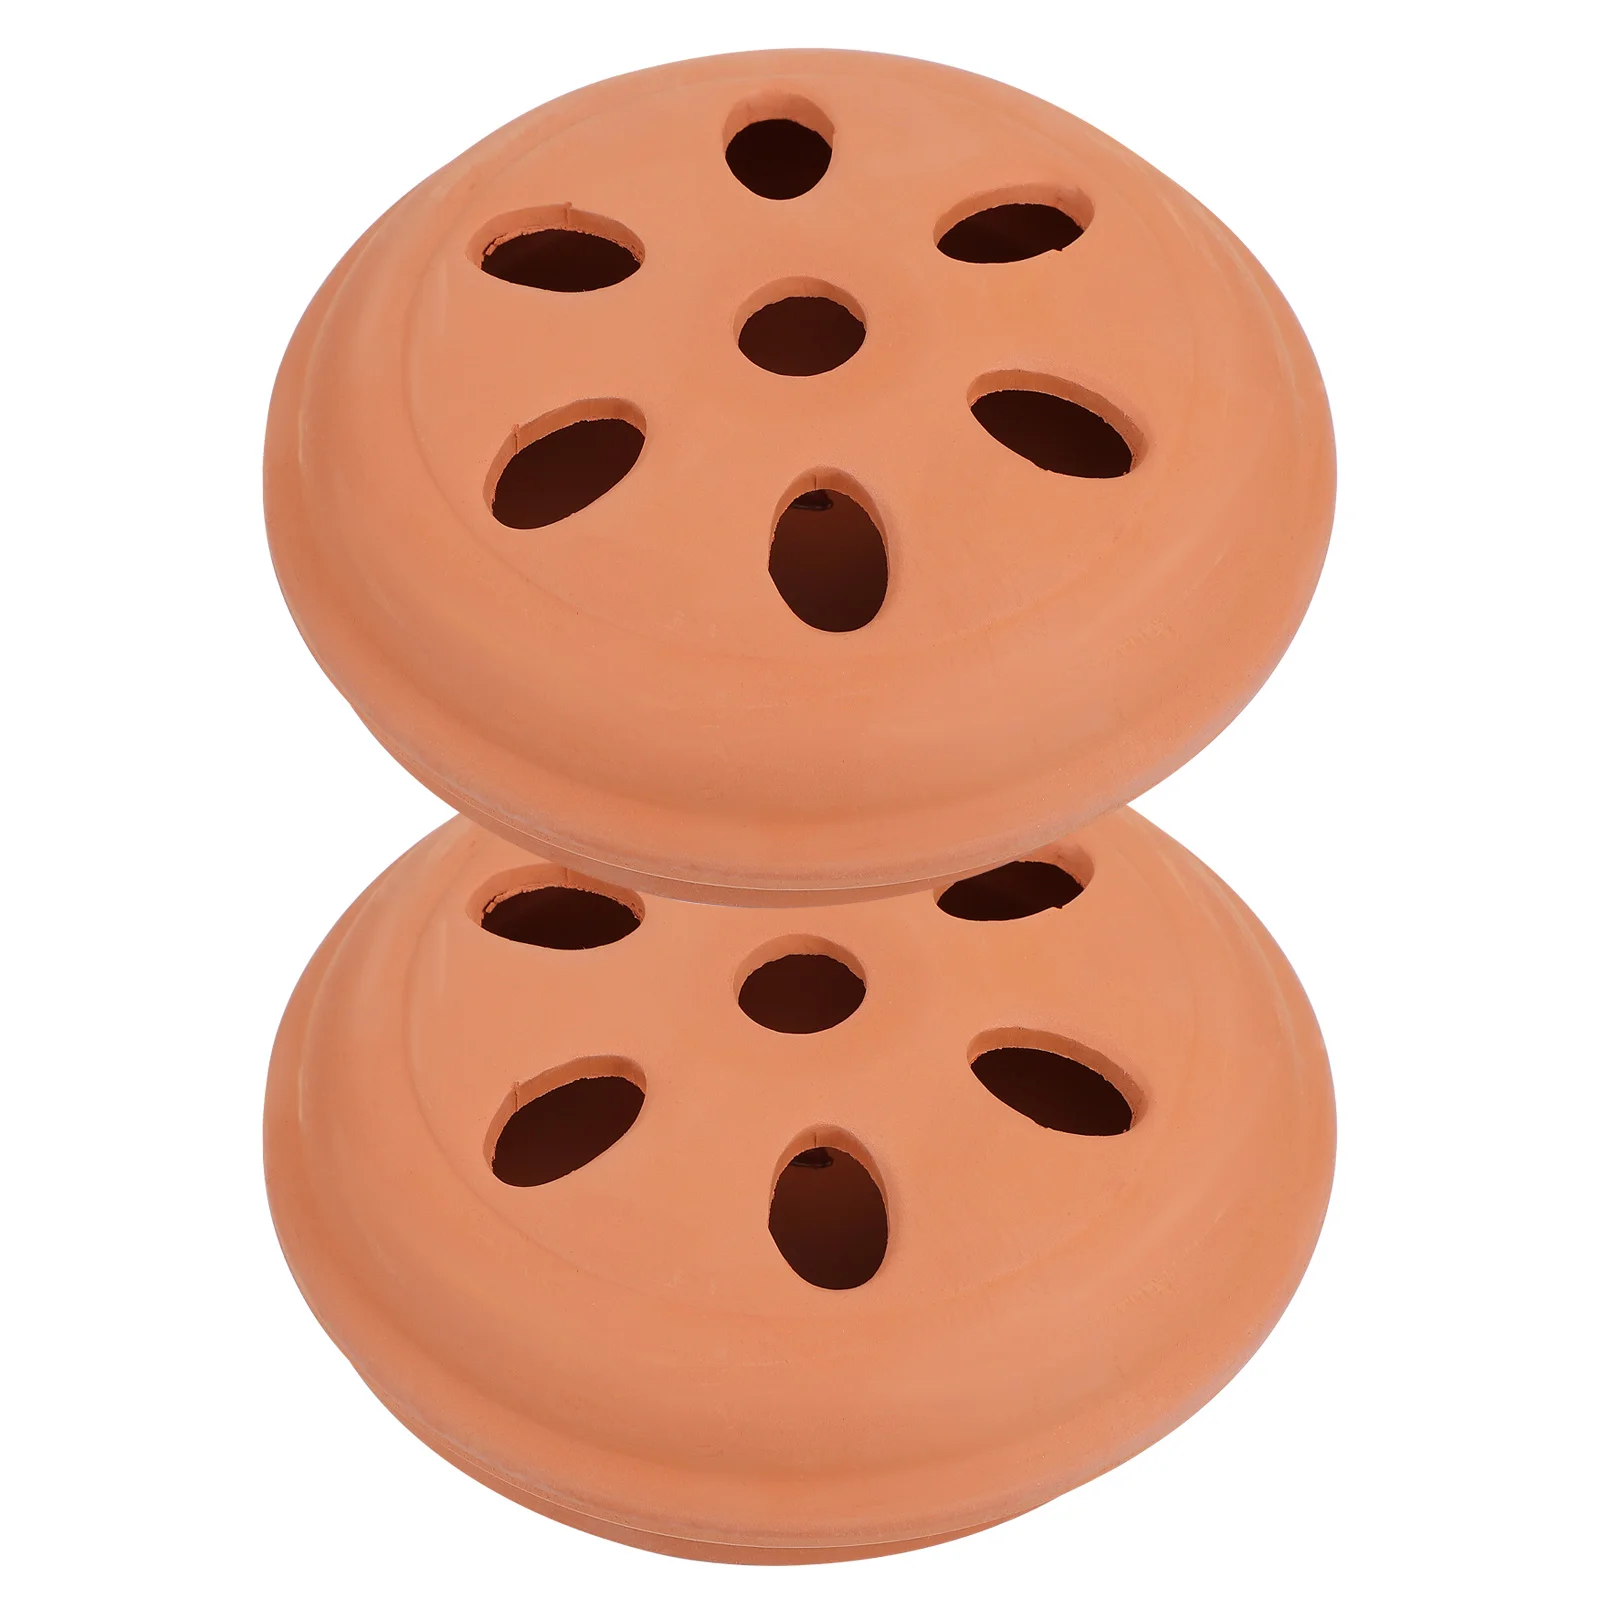 

2 Pcs Hollow Aroma Diffuser Fragrance Coil Holder Ceramic Serving Tray Mosquito Burner Rack Terracotta Outdoor